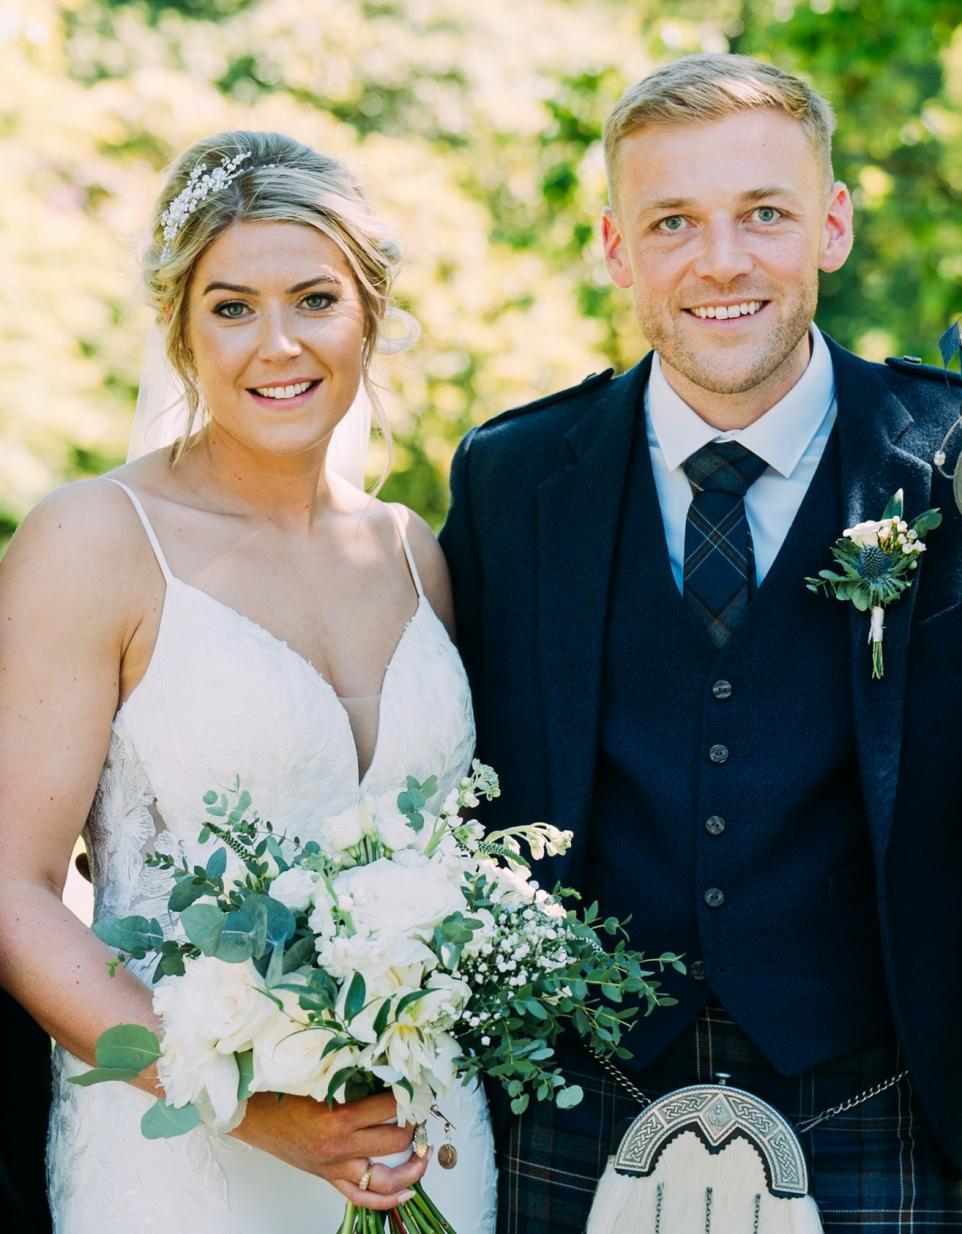 Married in June at Urr Parish Church were Anna Yates, East Logan Farm, Castle Douglas, and Calum Cruickshank, from Errol, Perth and Kinross. The reception afterwards was at Dalswinton Estate, near Dumfries